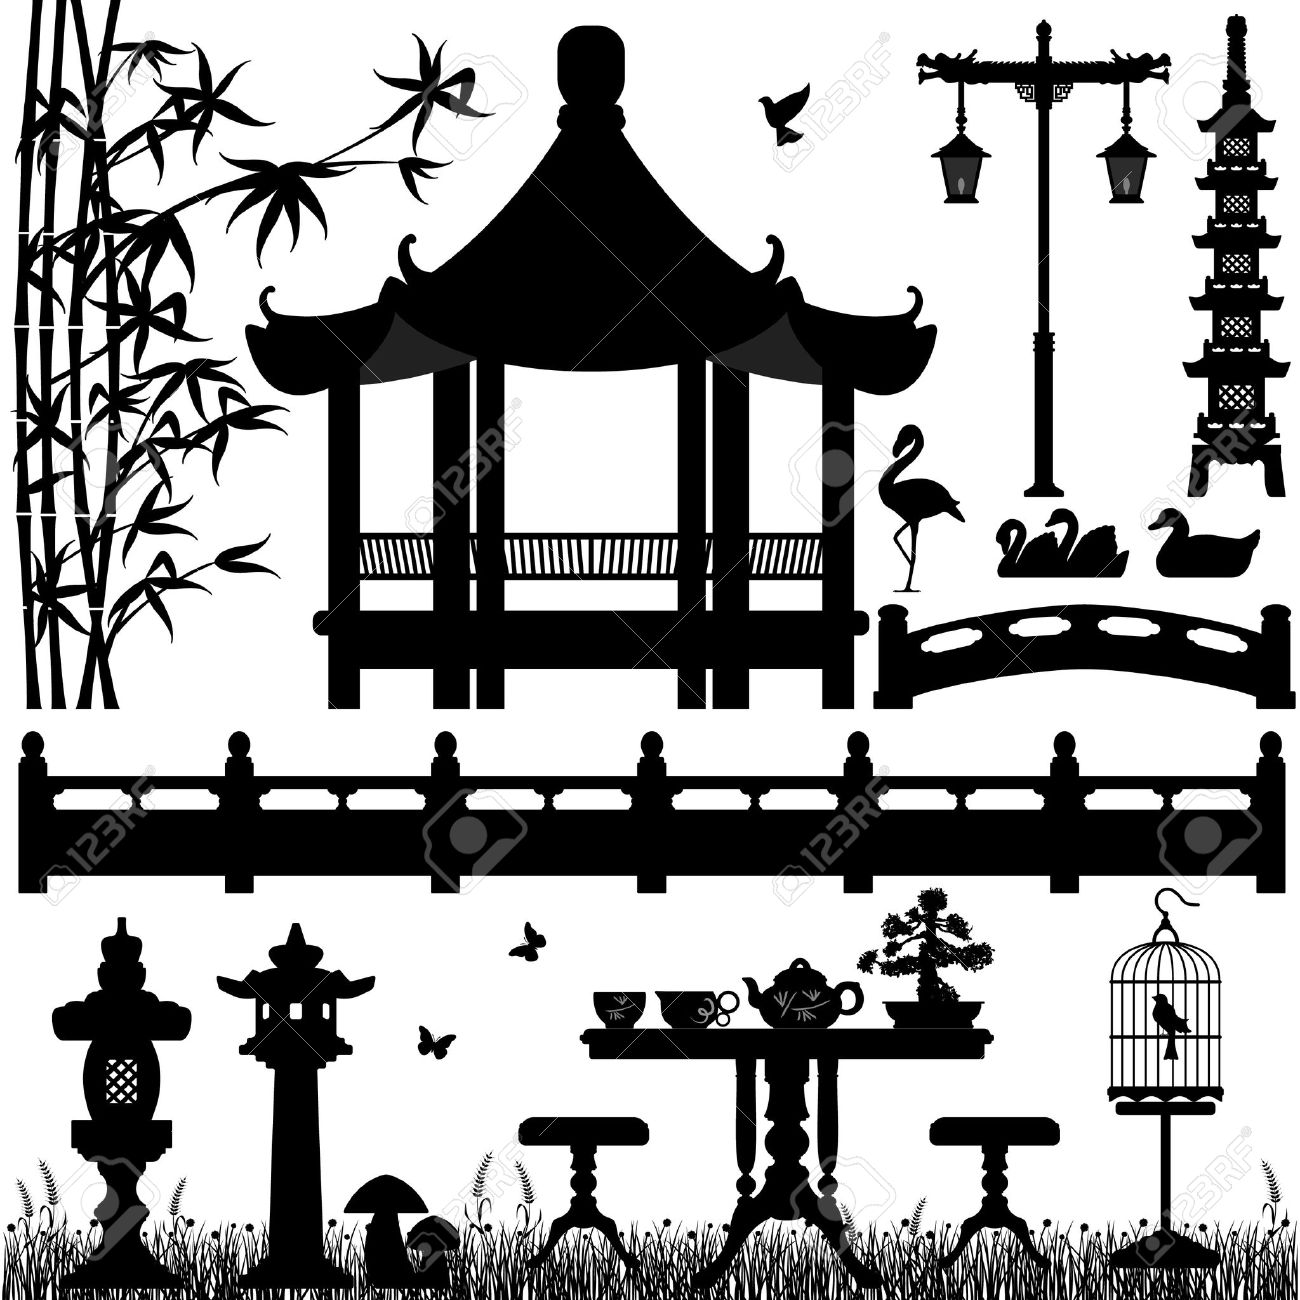 Japanese Garden clipart #12, Download drawings